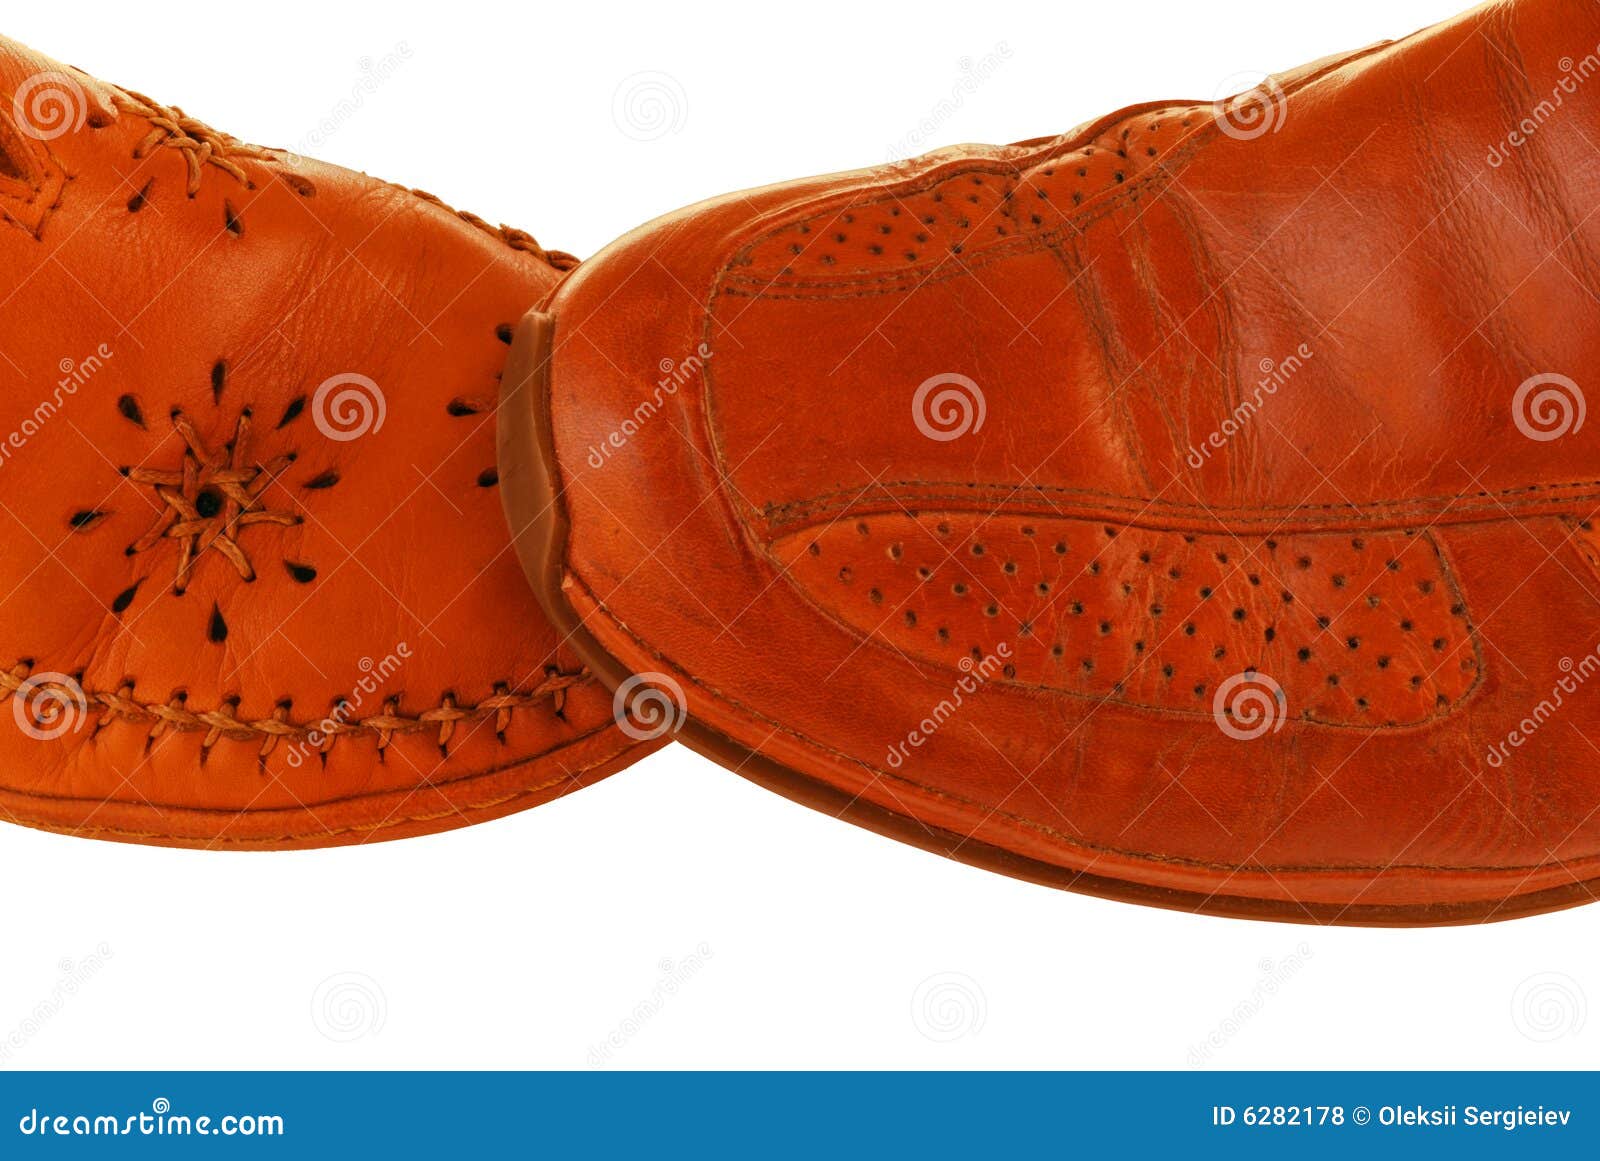 Sexual harassment shoe stock photo. Image of exhibition - 6282178